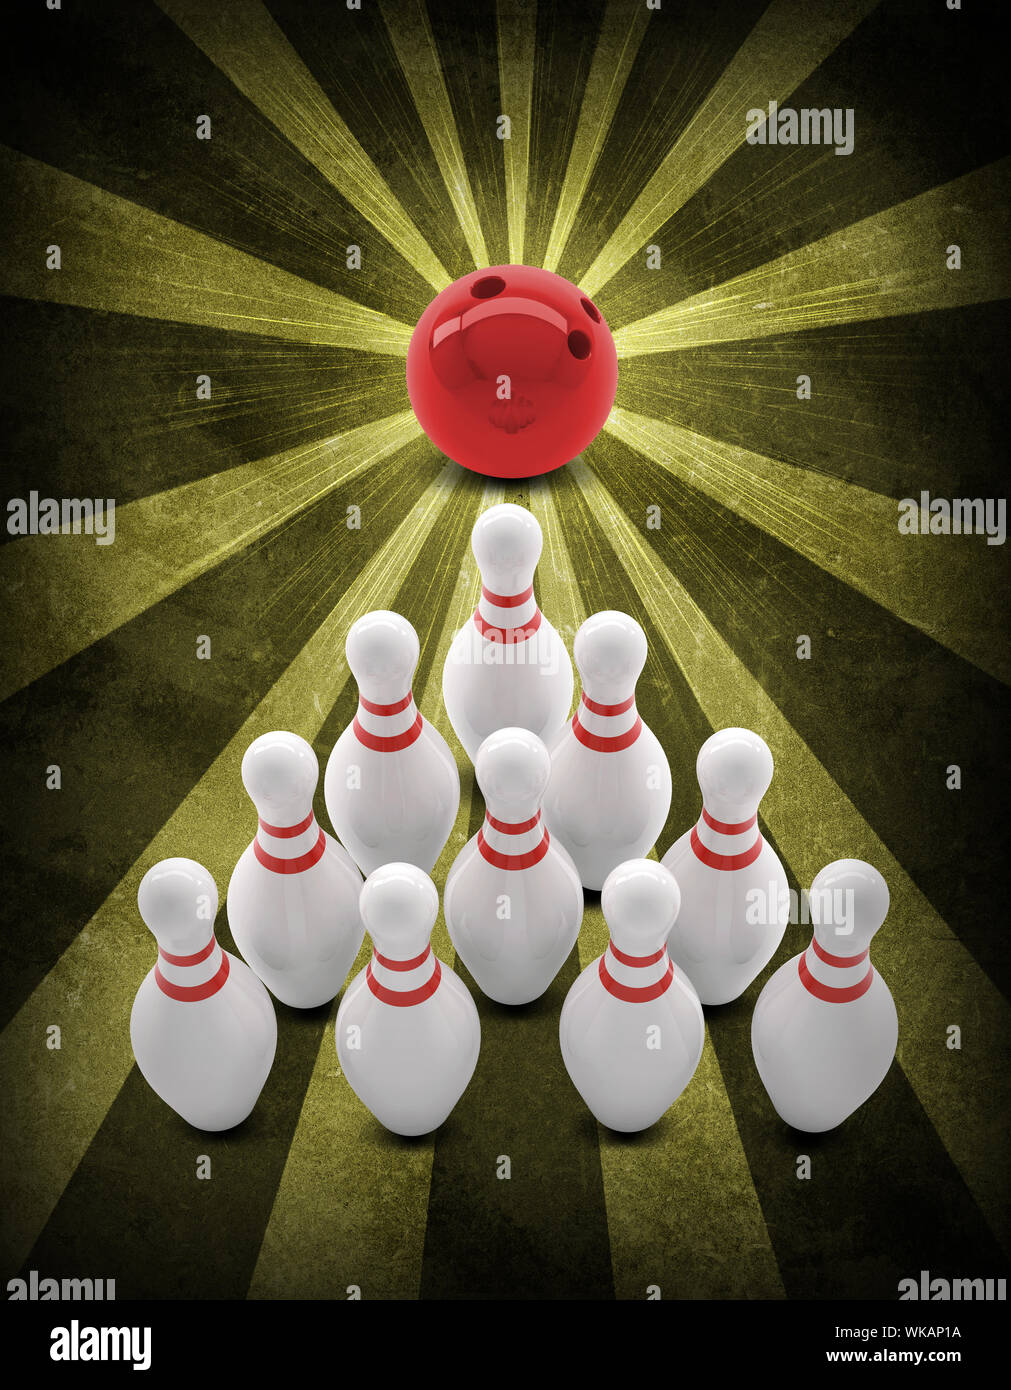 Bowling ball breaks standing pins. Sports background. Grunge style Stock Photo